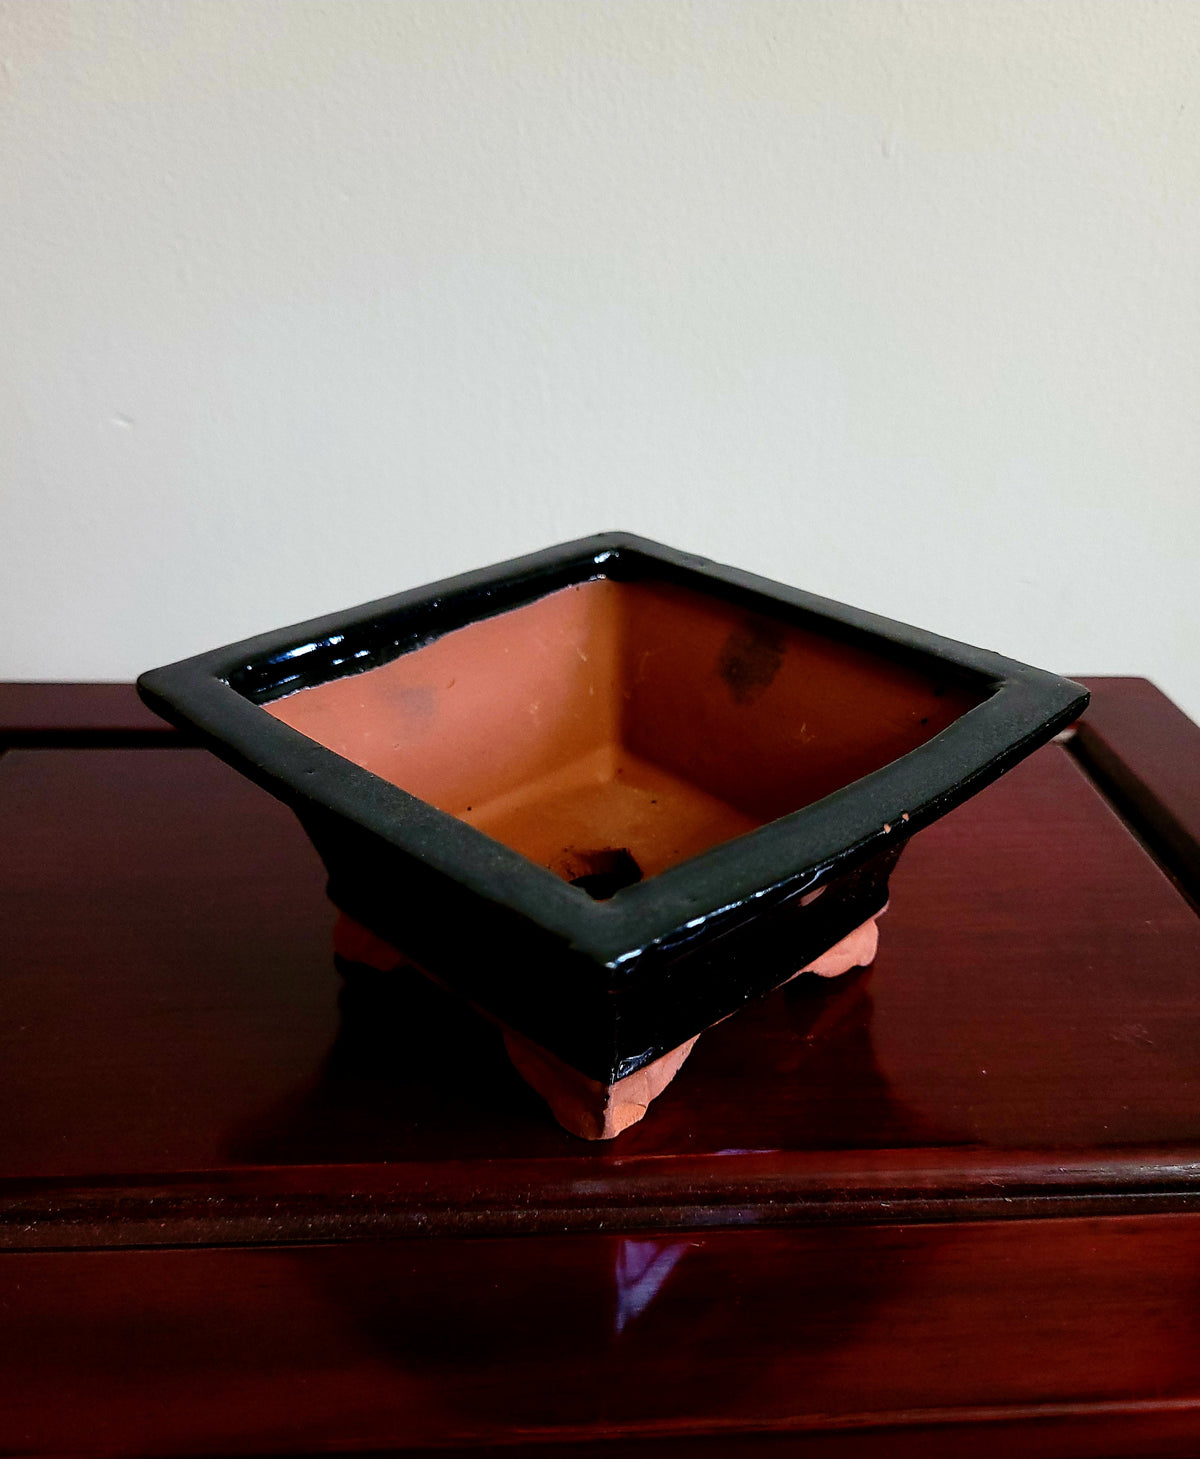 4" Chinese Glazed Square Bonsai Pot with flared sides